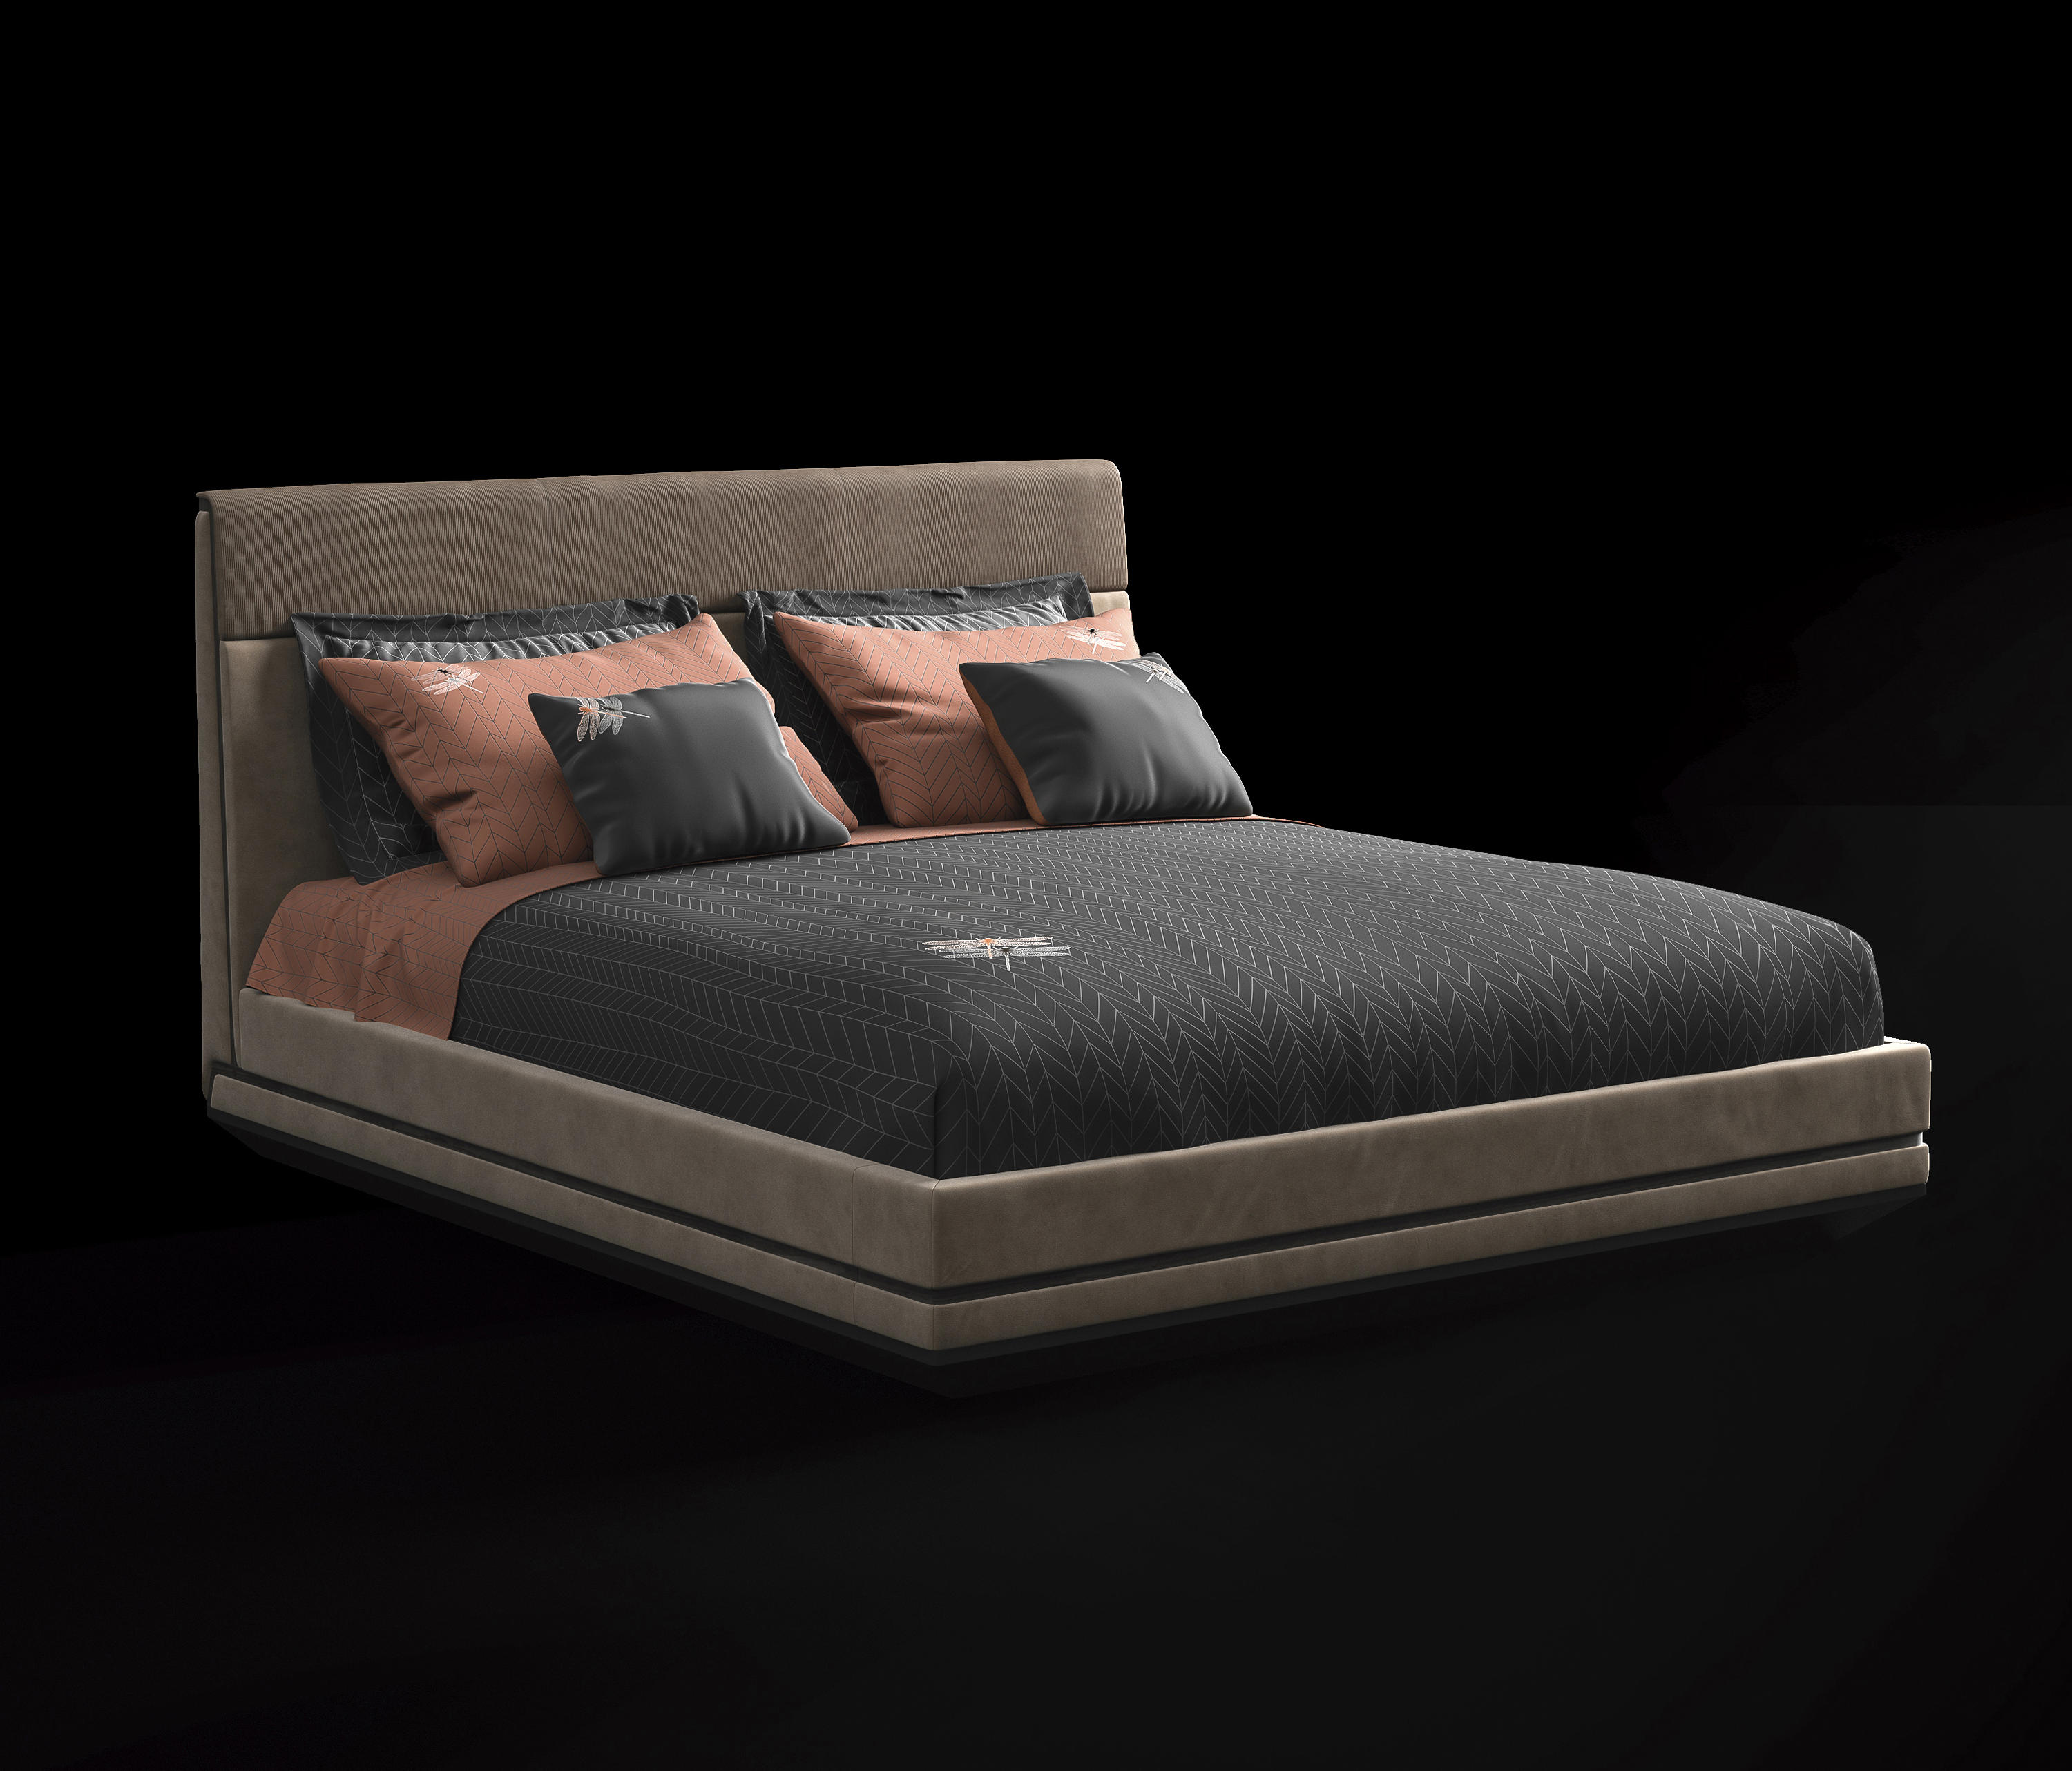 Dragonfly Beds From Cprn Homood Architonic